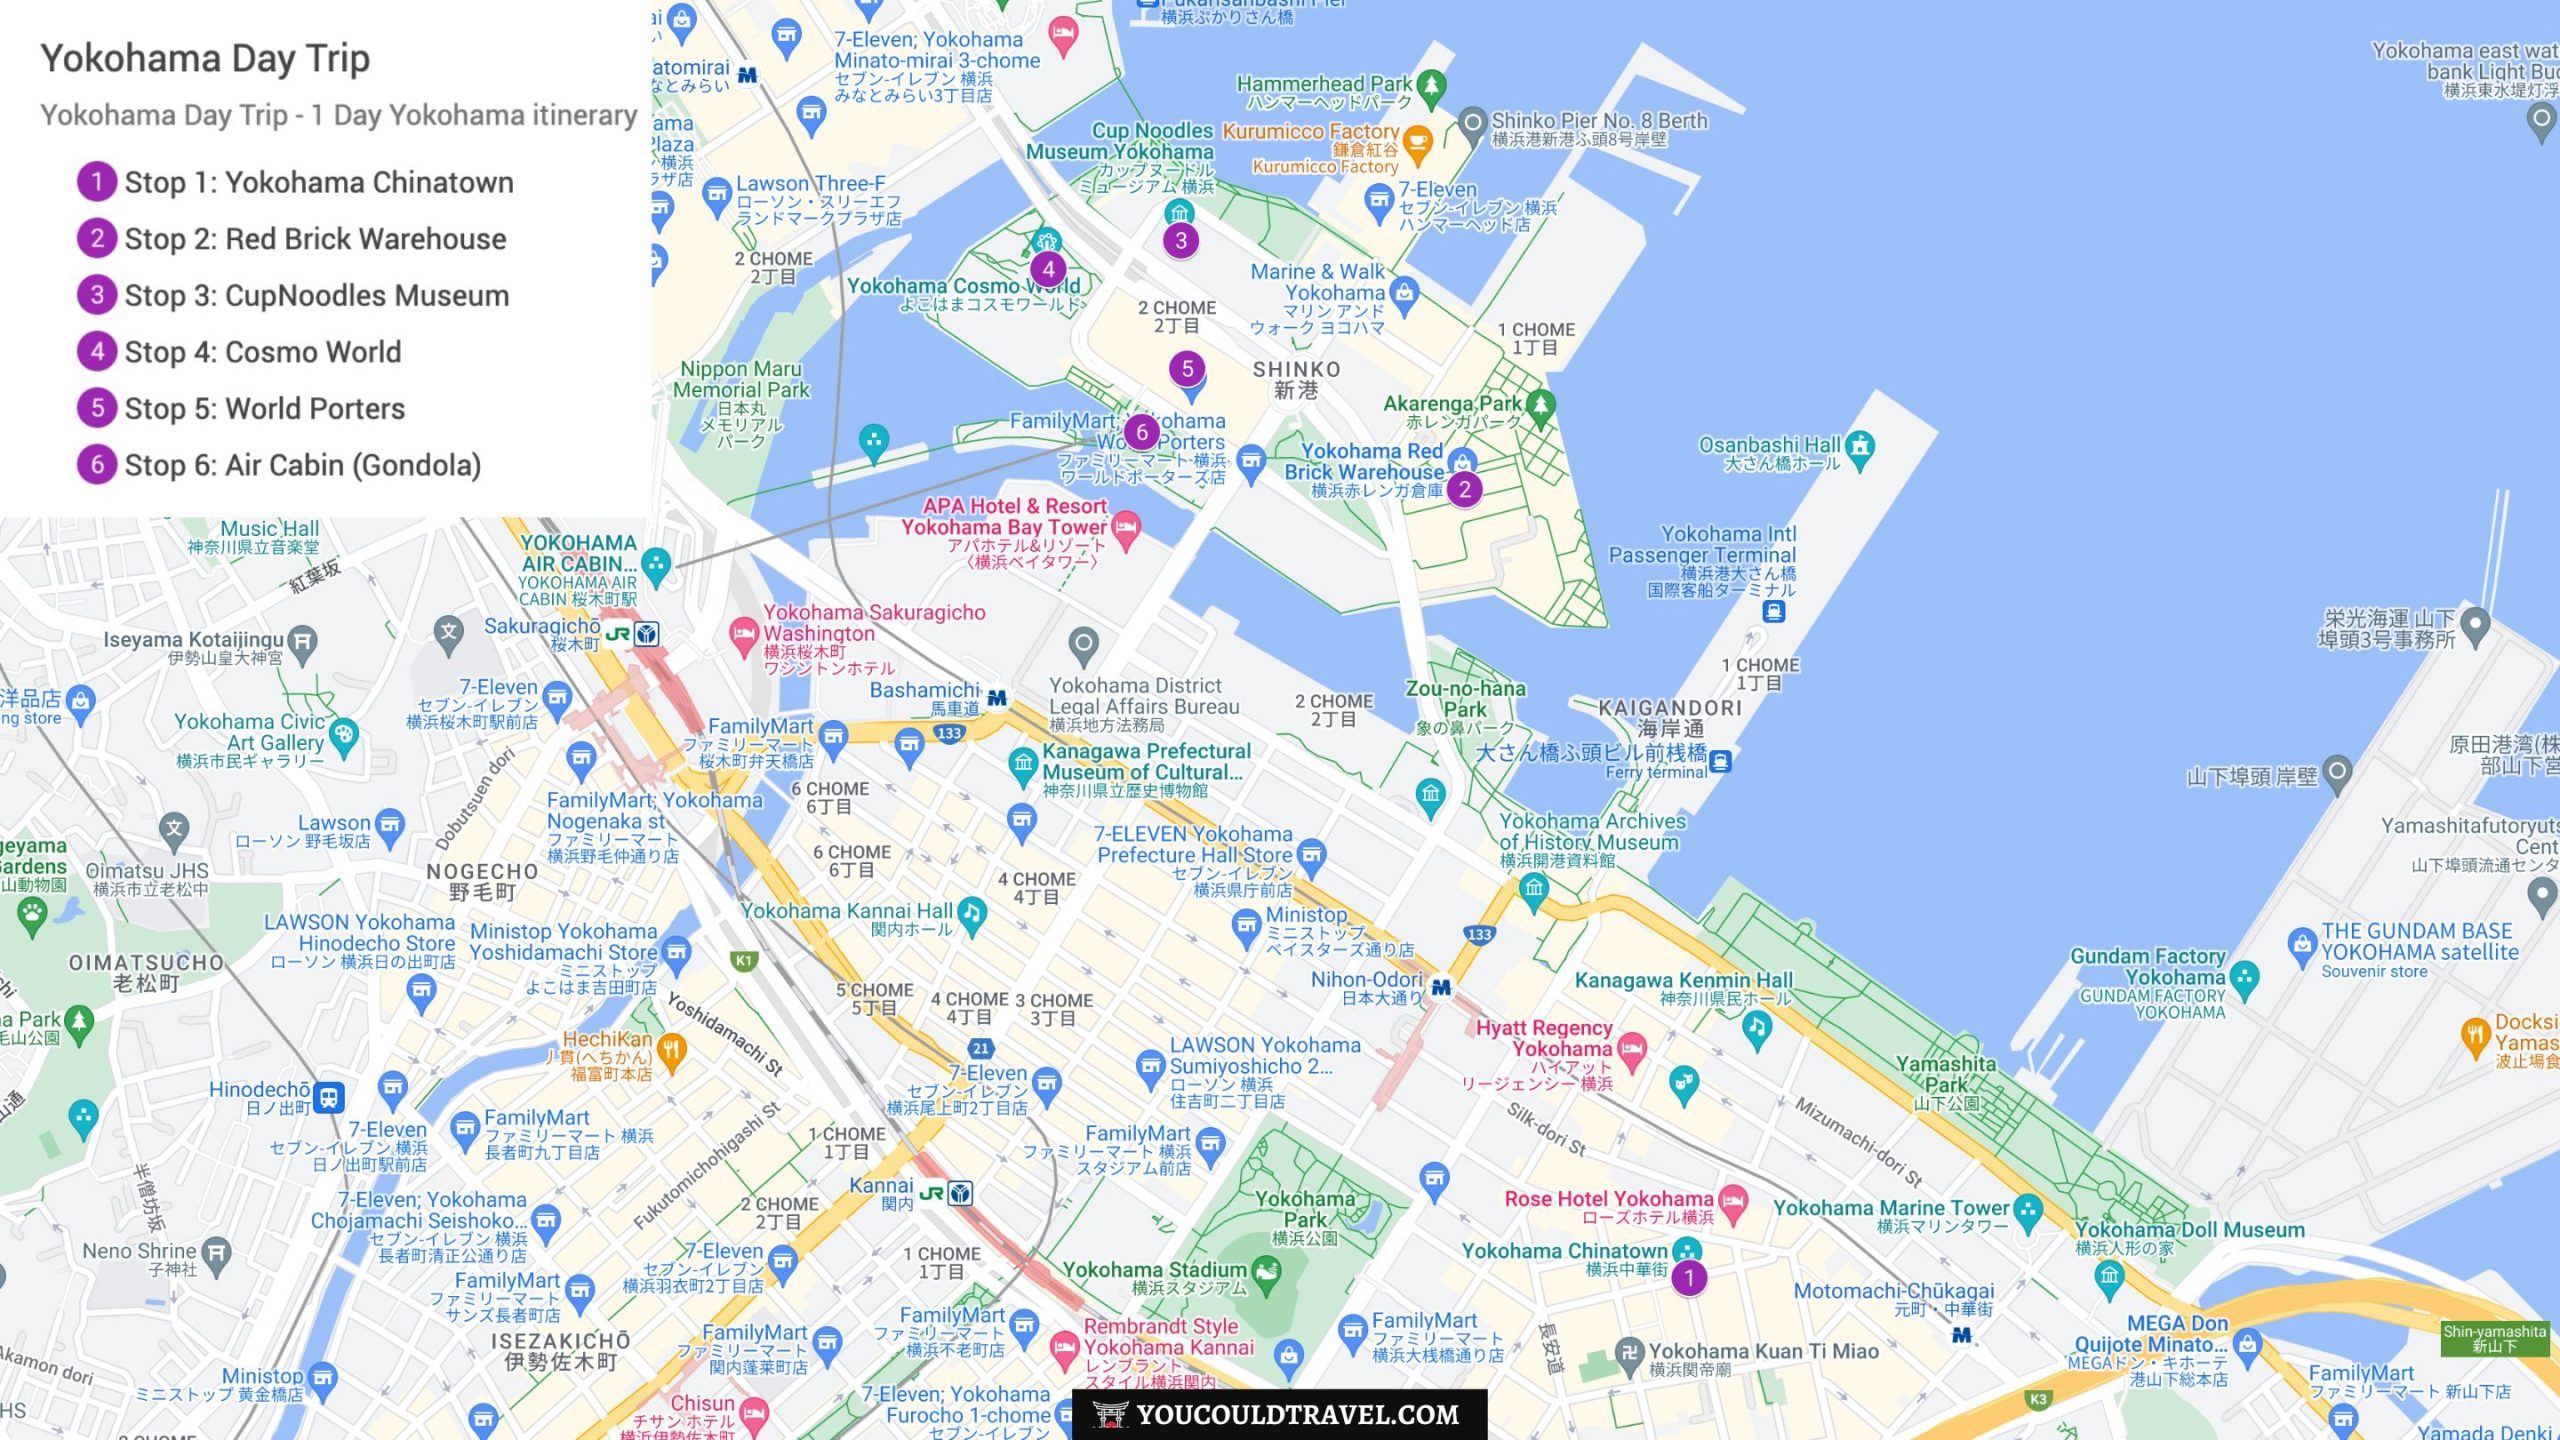 Yokohama Day trip itinerary map with all the stops